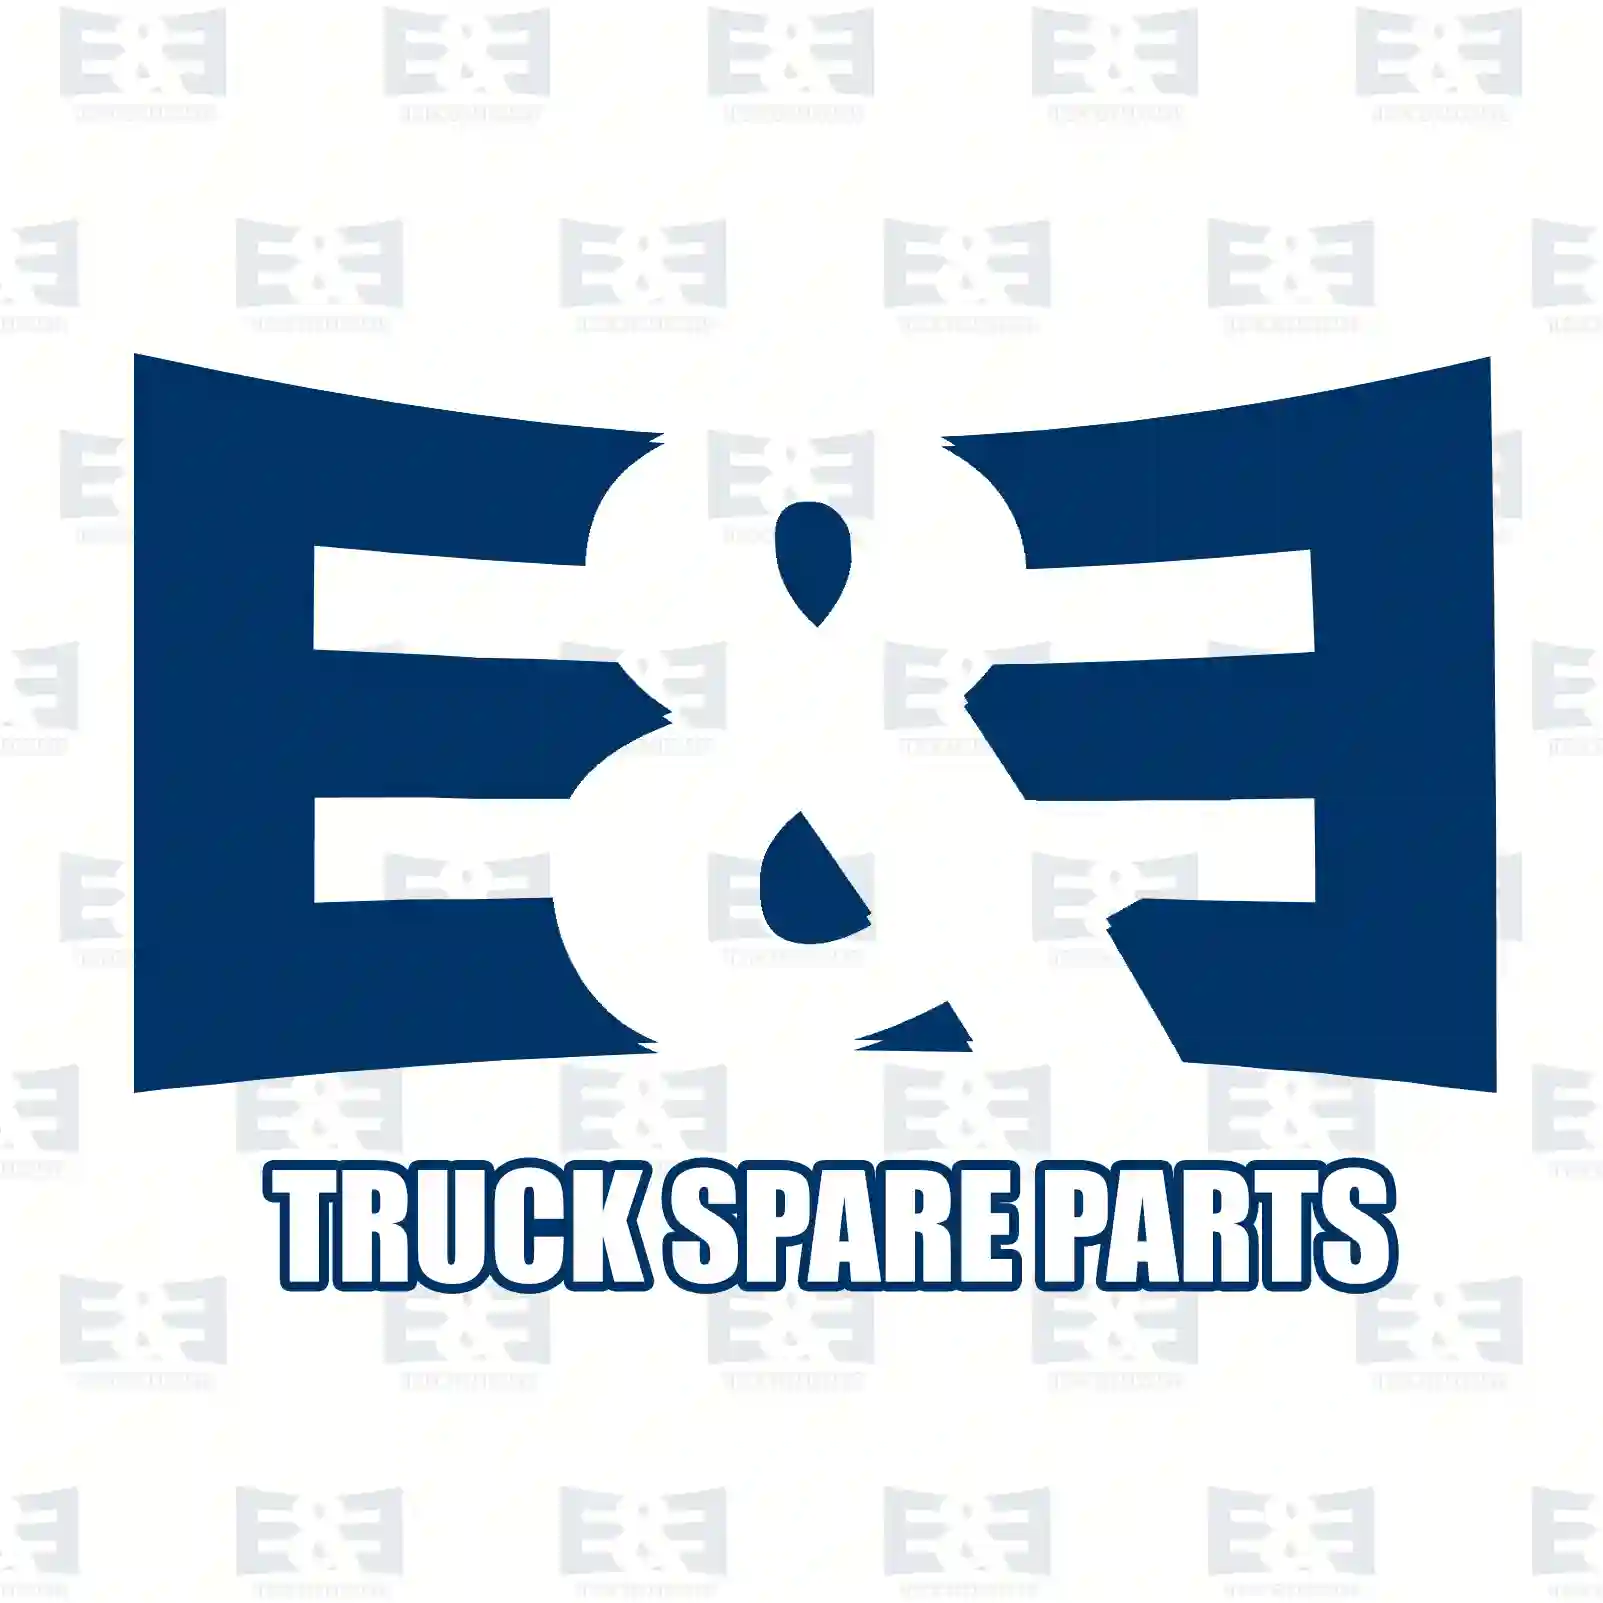 Wear Indicator Wear indicator kit, EE No 2E2297302 ,  oem no:1829401, BK31-2N248-CB, E&E Truck Spare Parts | Truck Spare Parts, Auotomotive Spare Parts